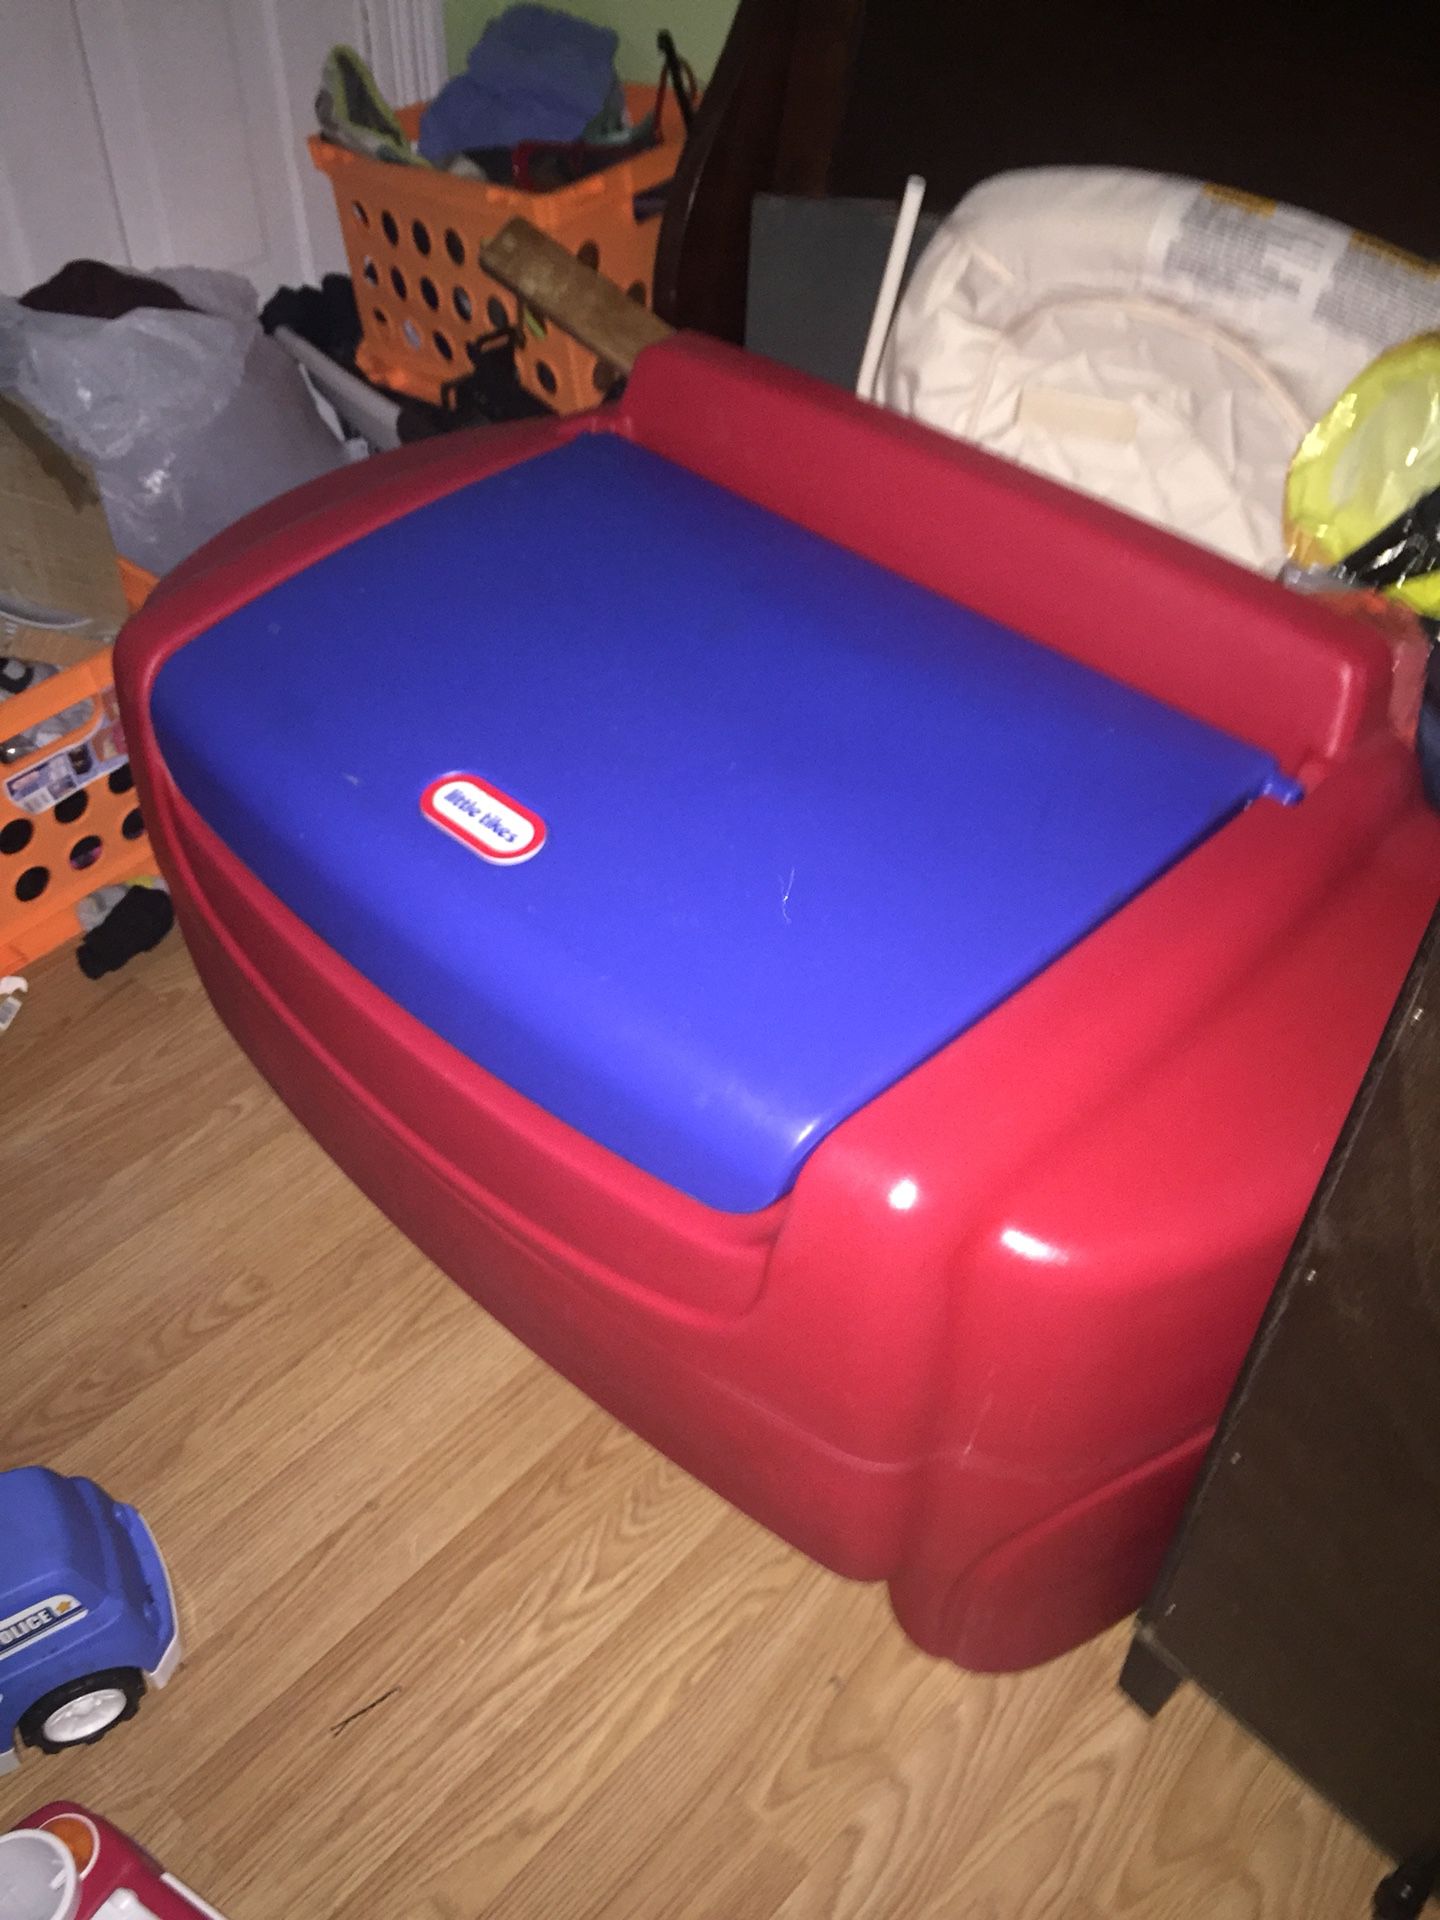 Kids toys and high chair and crib mattress ect